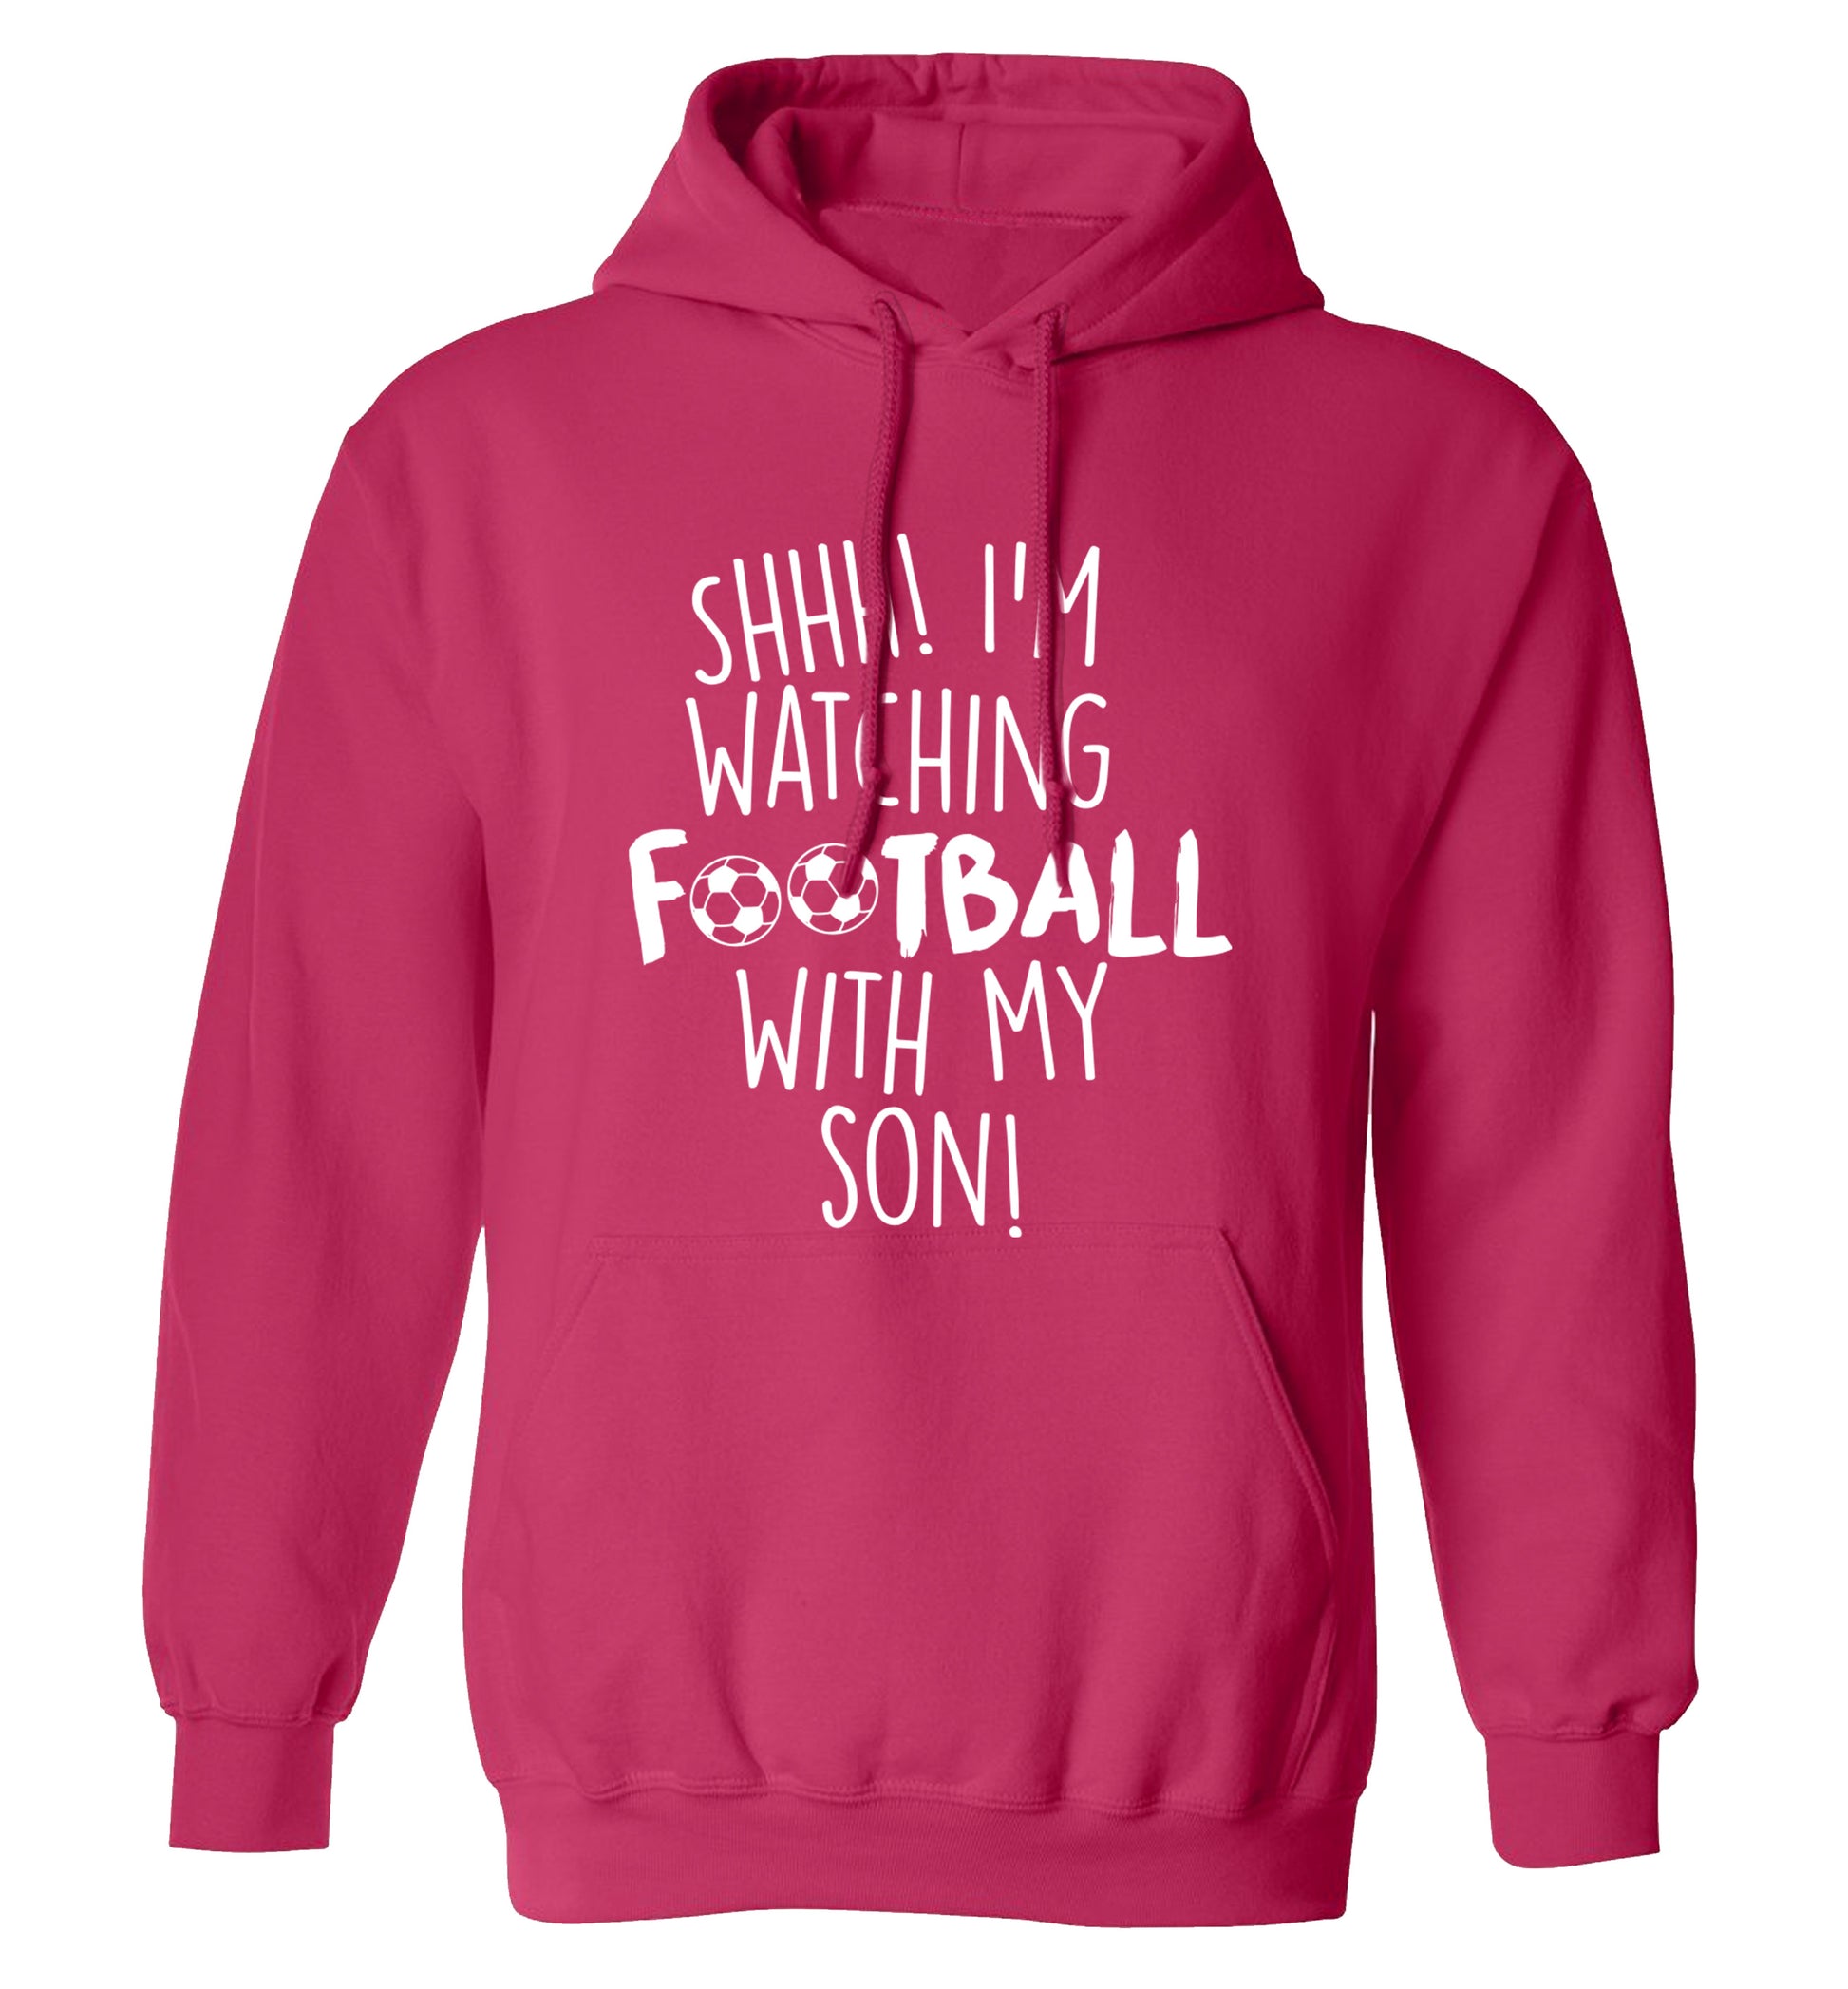 Shhh I'm watching football with my son adults unisexpink hoodie 2XL